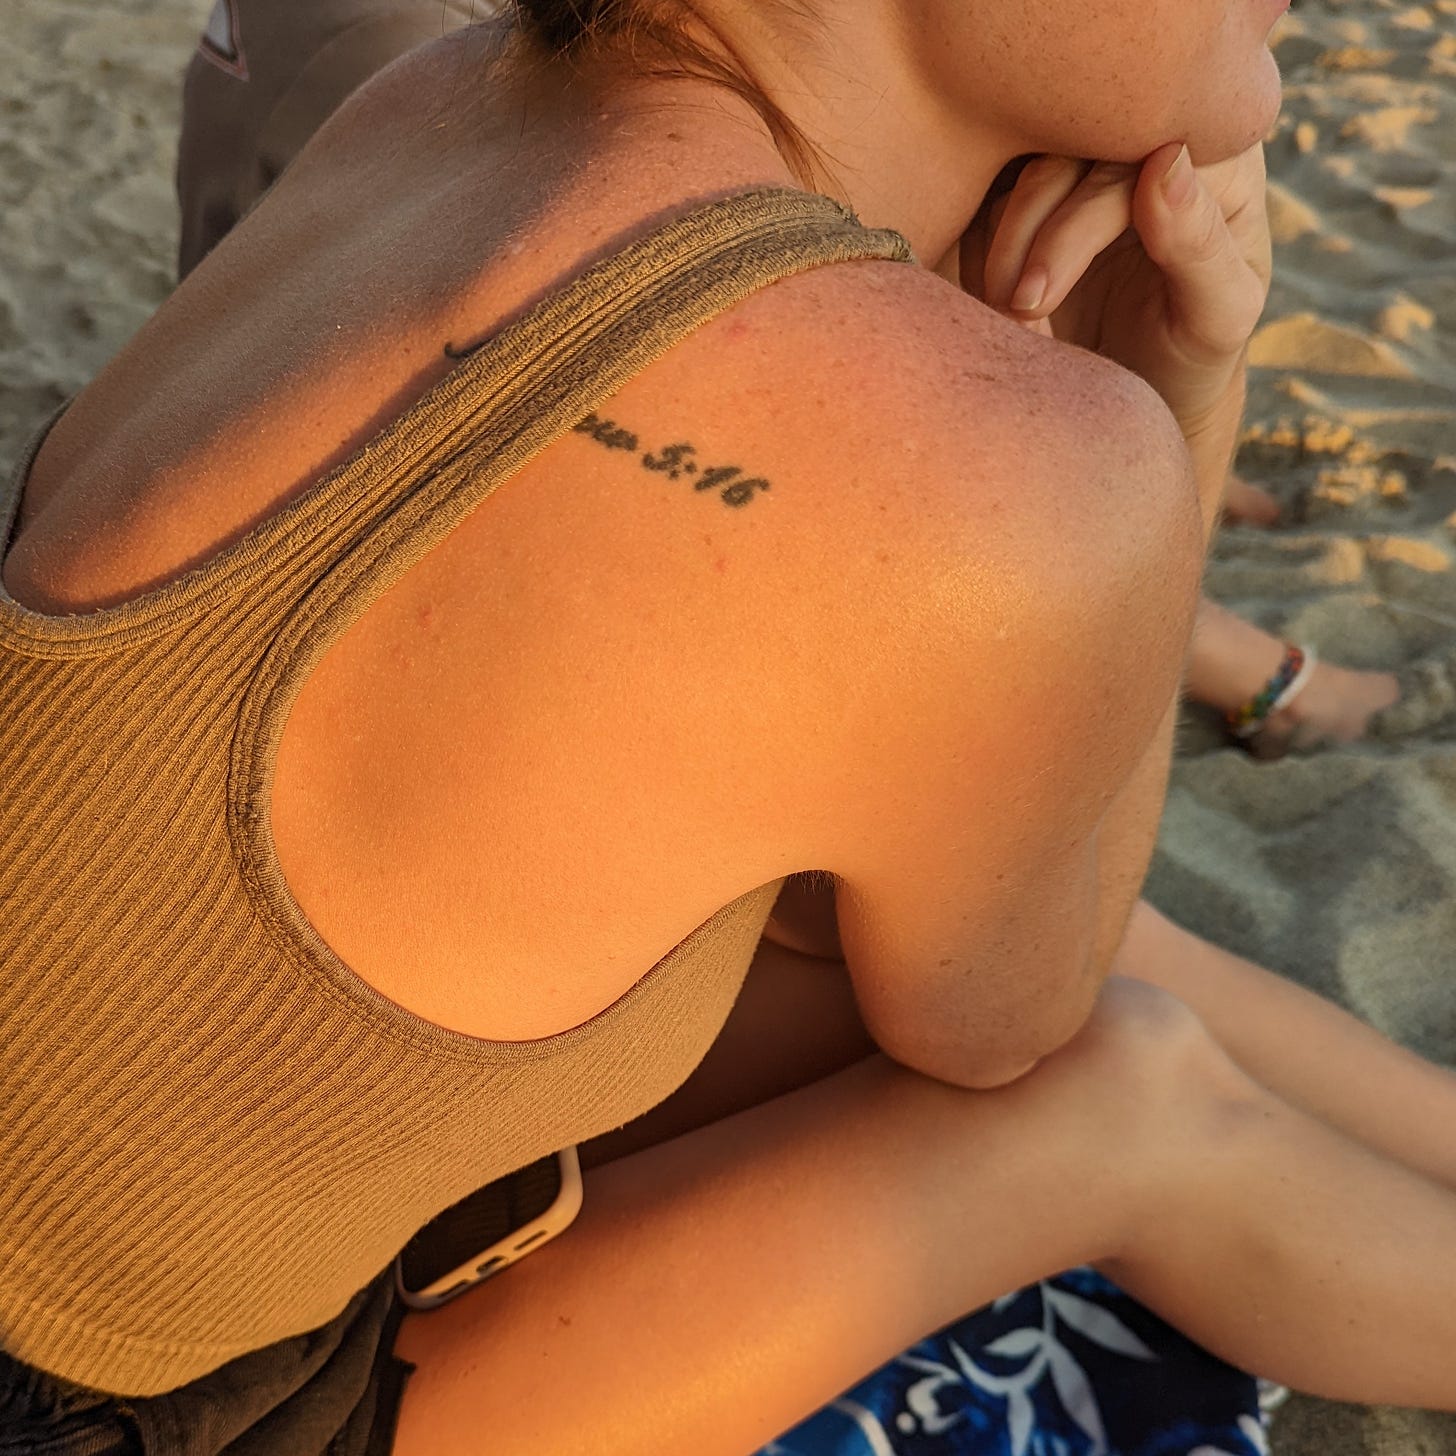 A female figure sits on the sand watching the sunset. She is wearing a tan tank top and on her right shoulder is a visible tattoo which reads Matthew 5:16